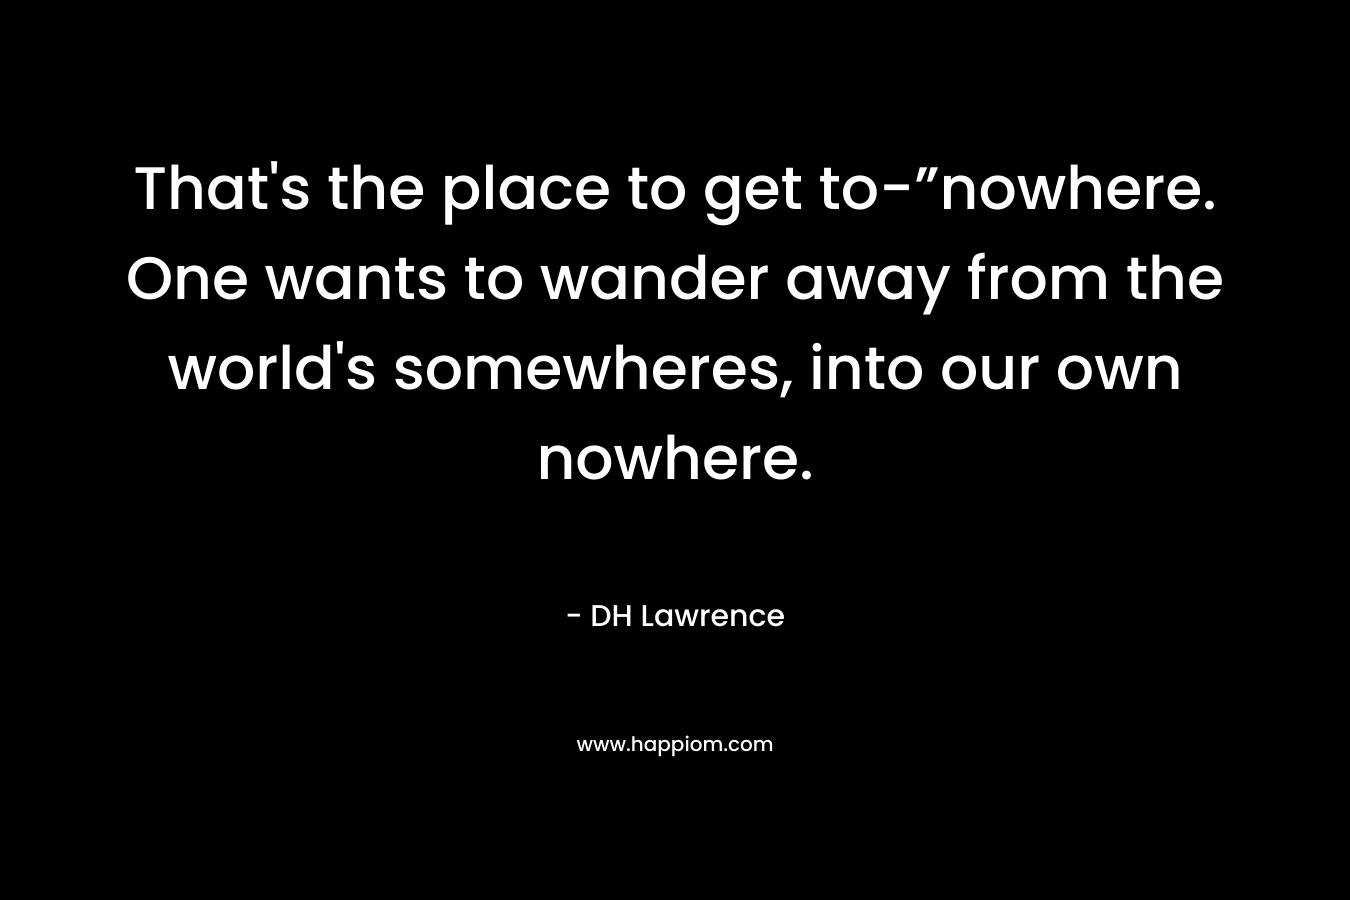 That’s the place to get to-”nowhere. One wants to wander away from the world’s somewheres, into our own nowhere. – DH Lawrence